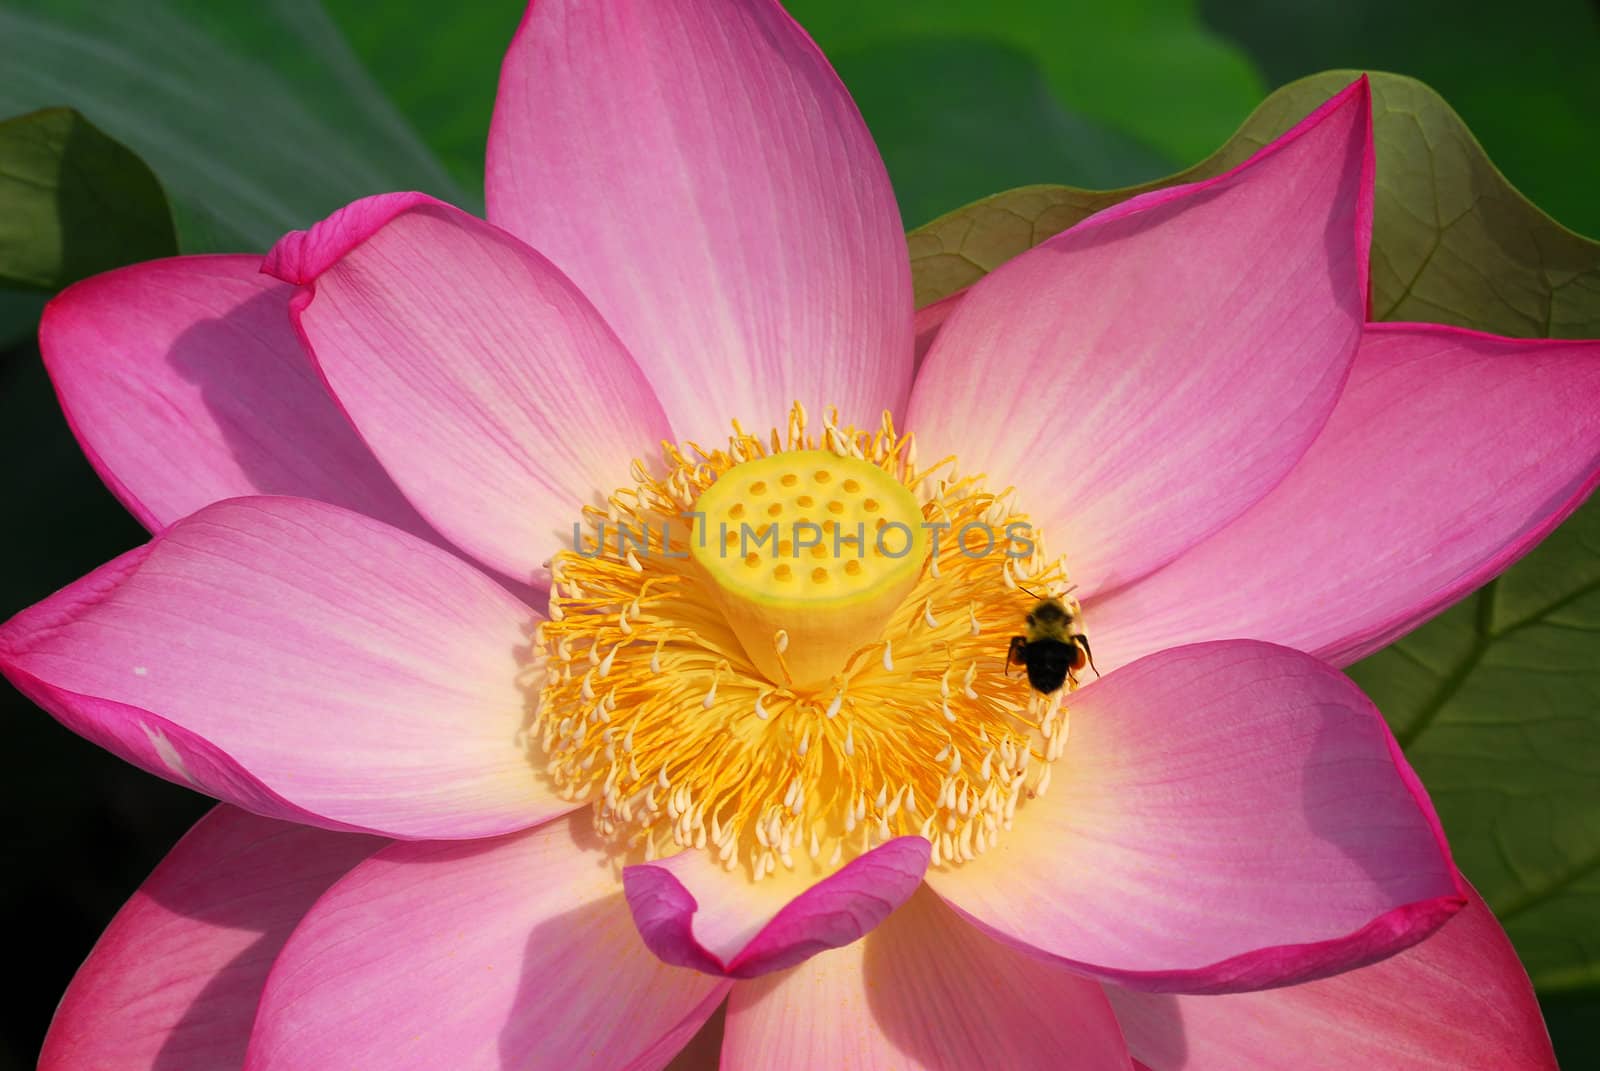 Close up detailed picture of a pink lotus flower